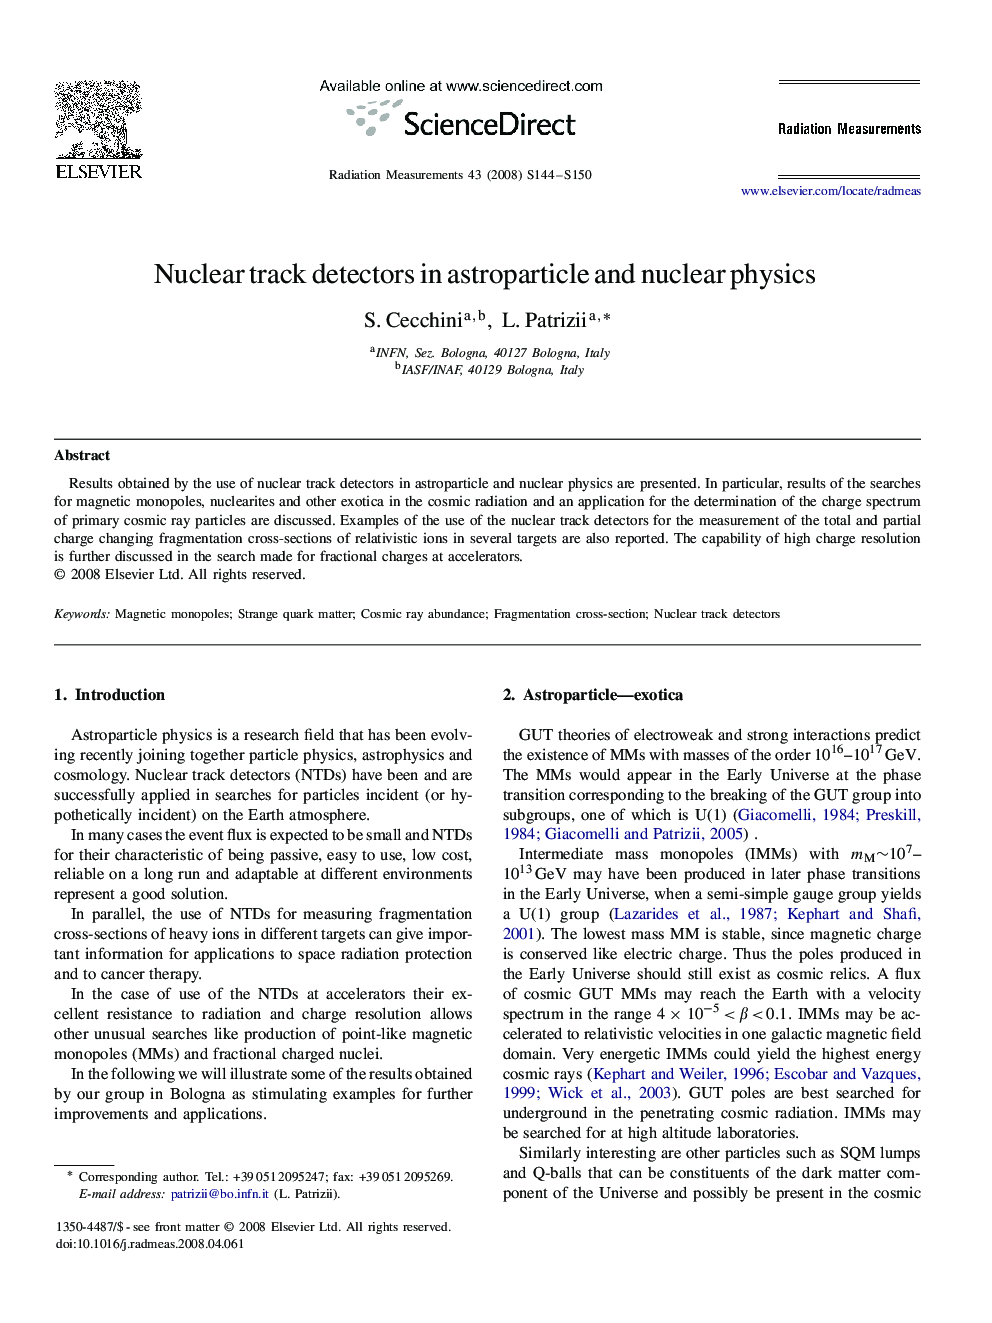 Nuclear track detectors in astroparticle and nuclear physics